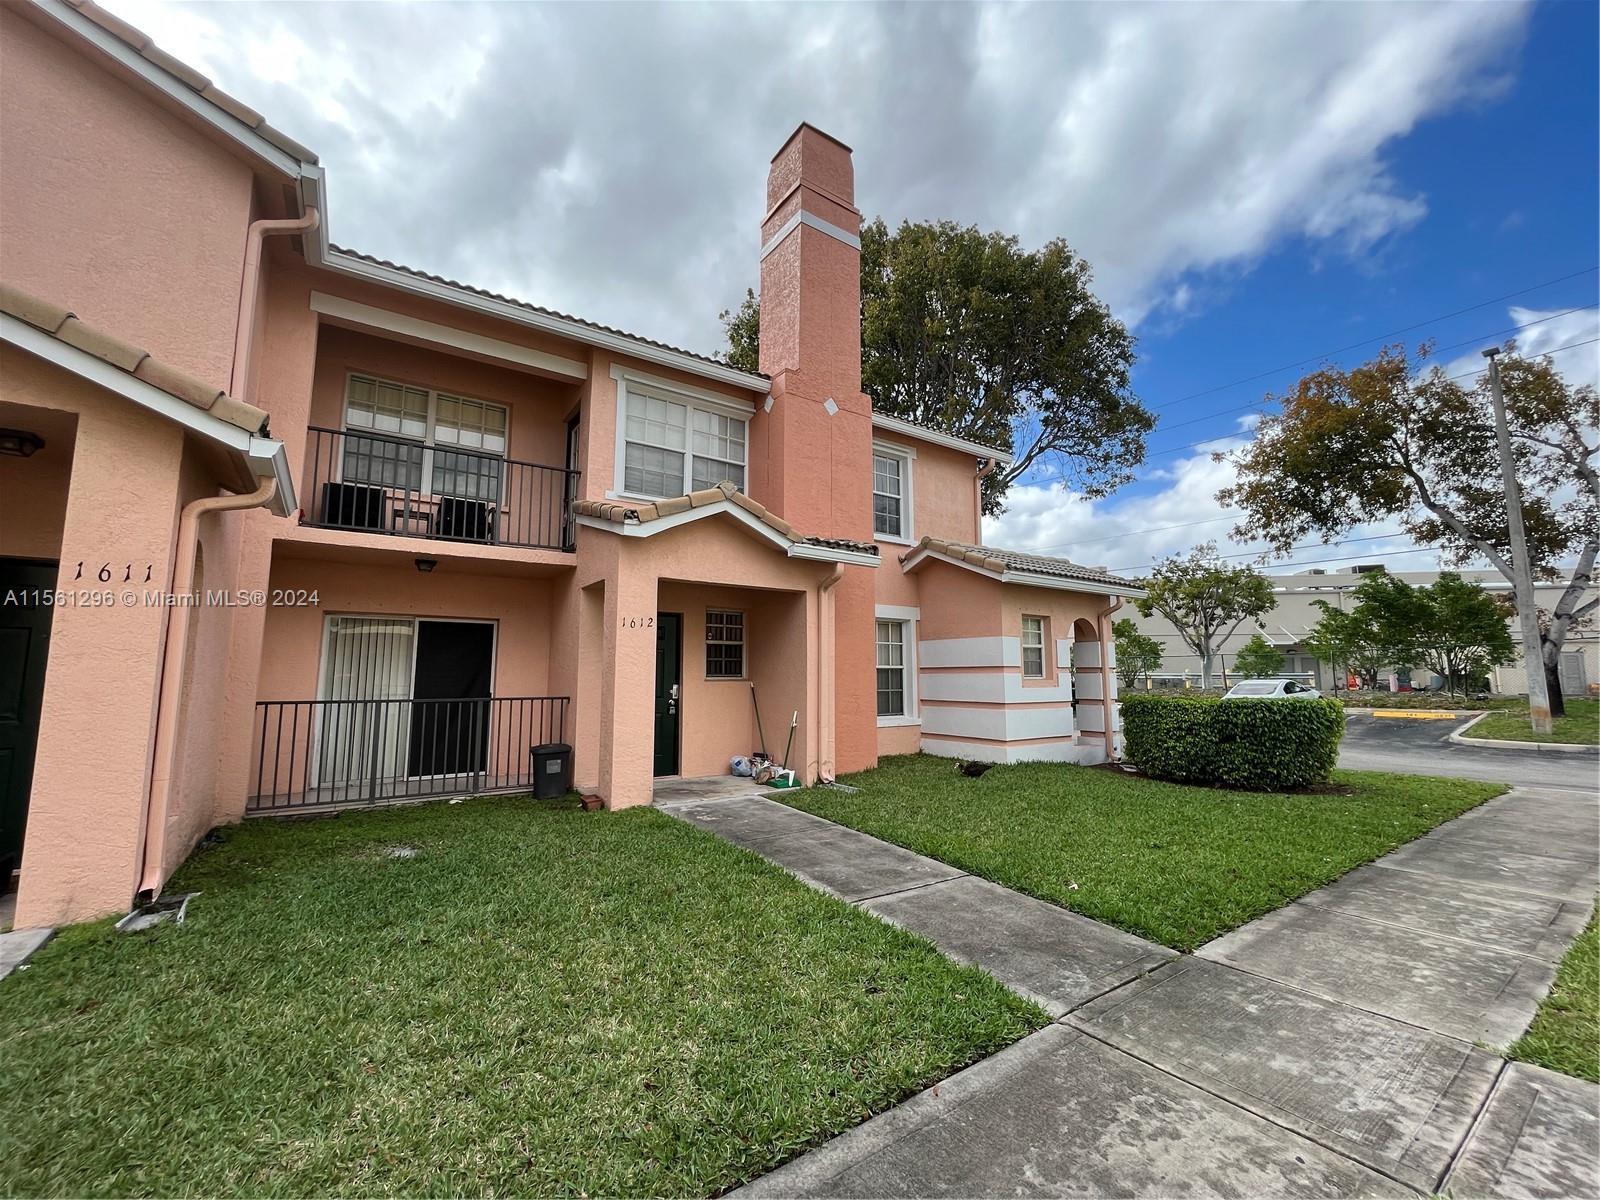 Photo of 1612 Belmont Ln #1612 in North Lauderdale, FL